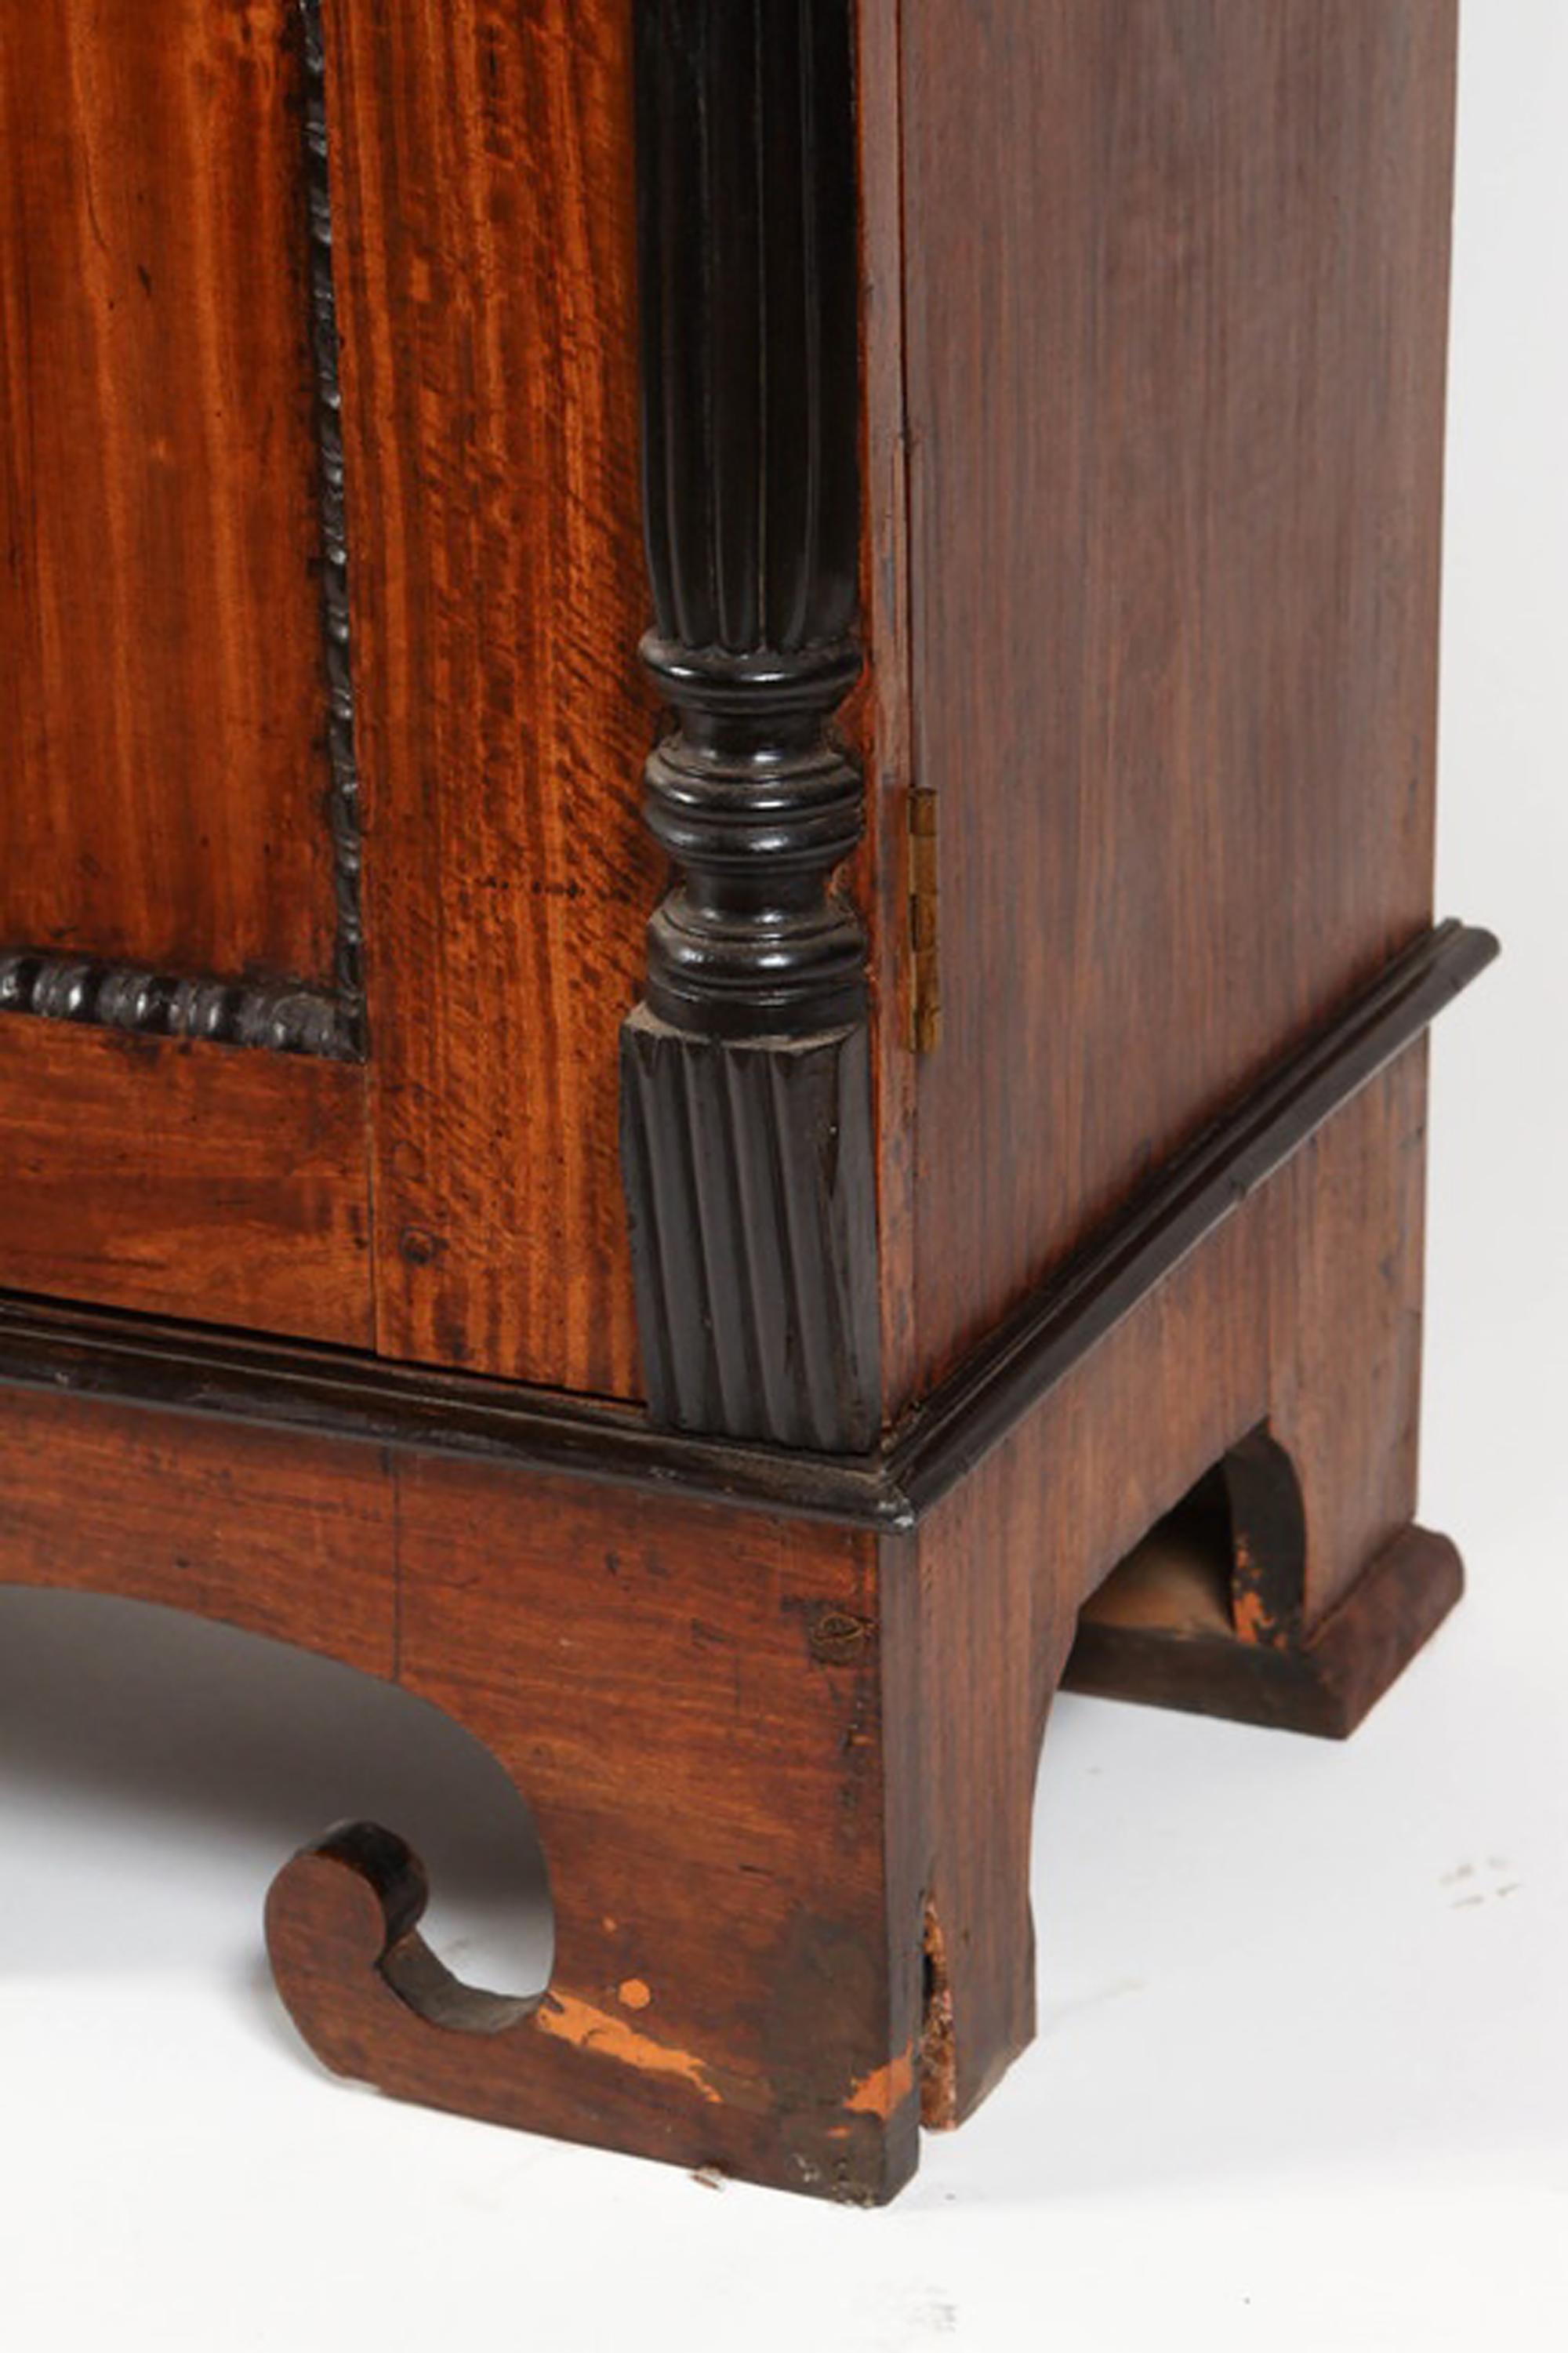 Early 19th century British Colonial cabinet of wide-paneled and figured solid satinwood with solid ebony trim. Sri Lanka, formerly known as Ceylon, is one of the few places in the word where satinwood and ebony are indigenous. It was prized by the